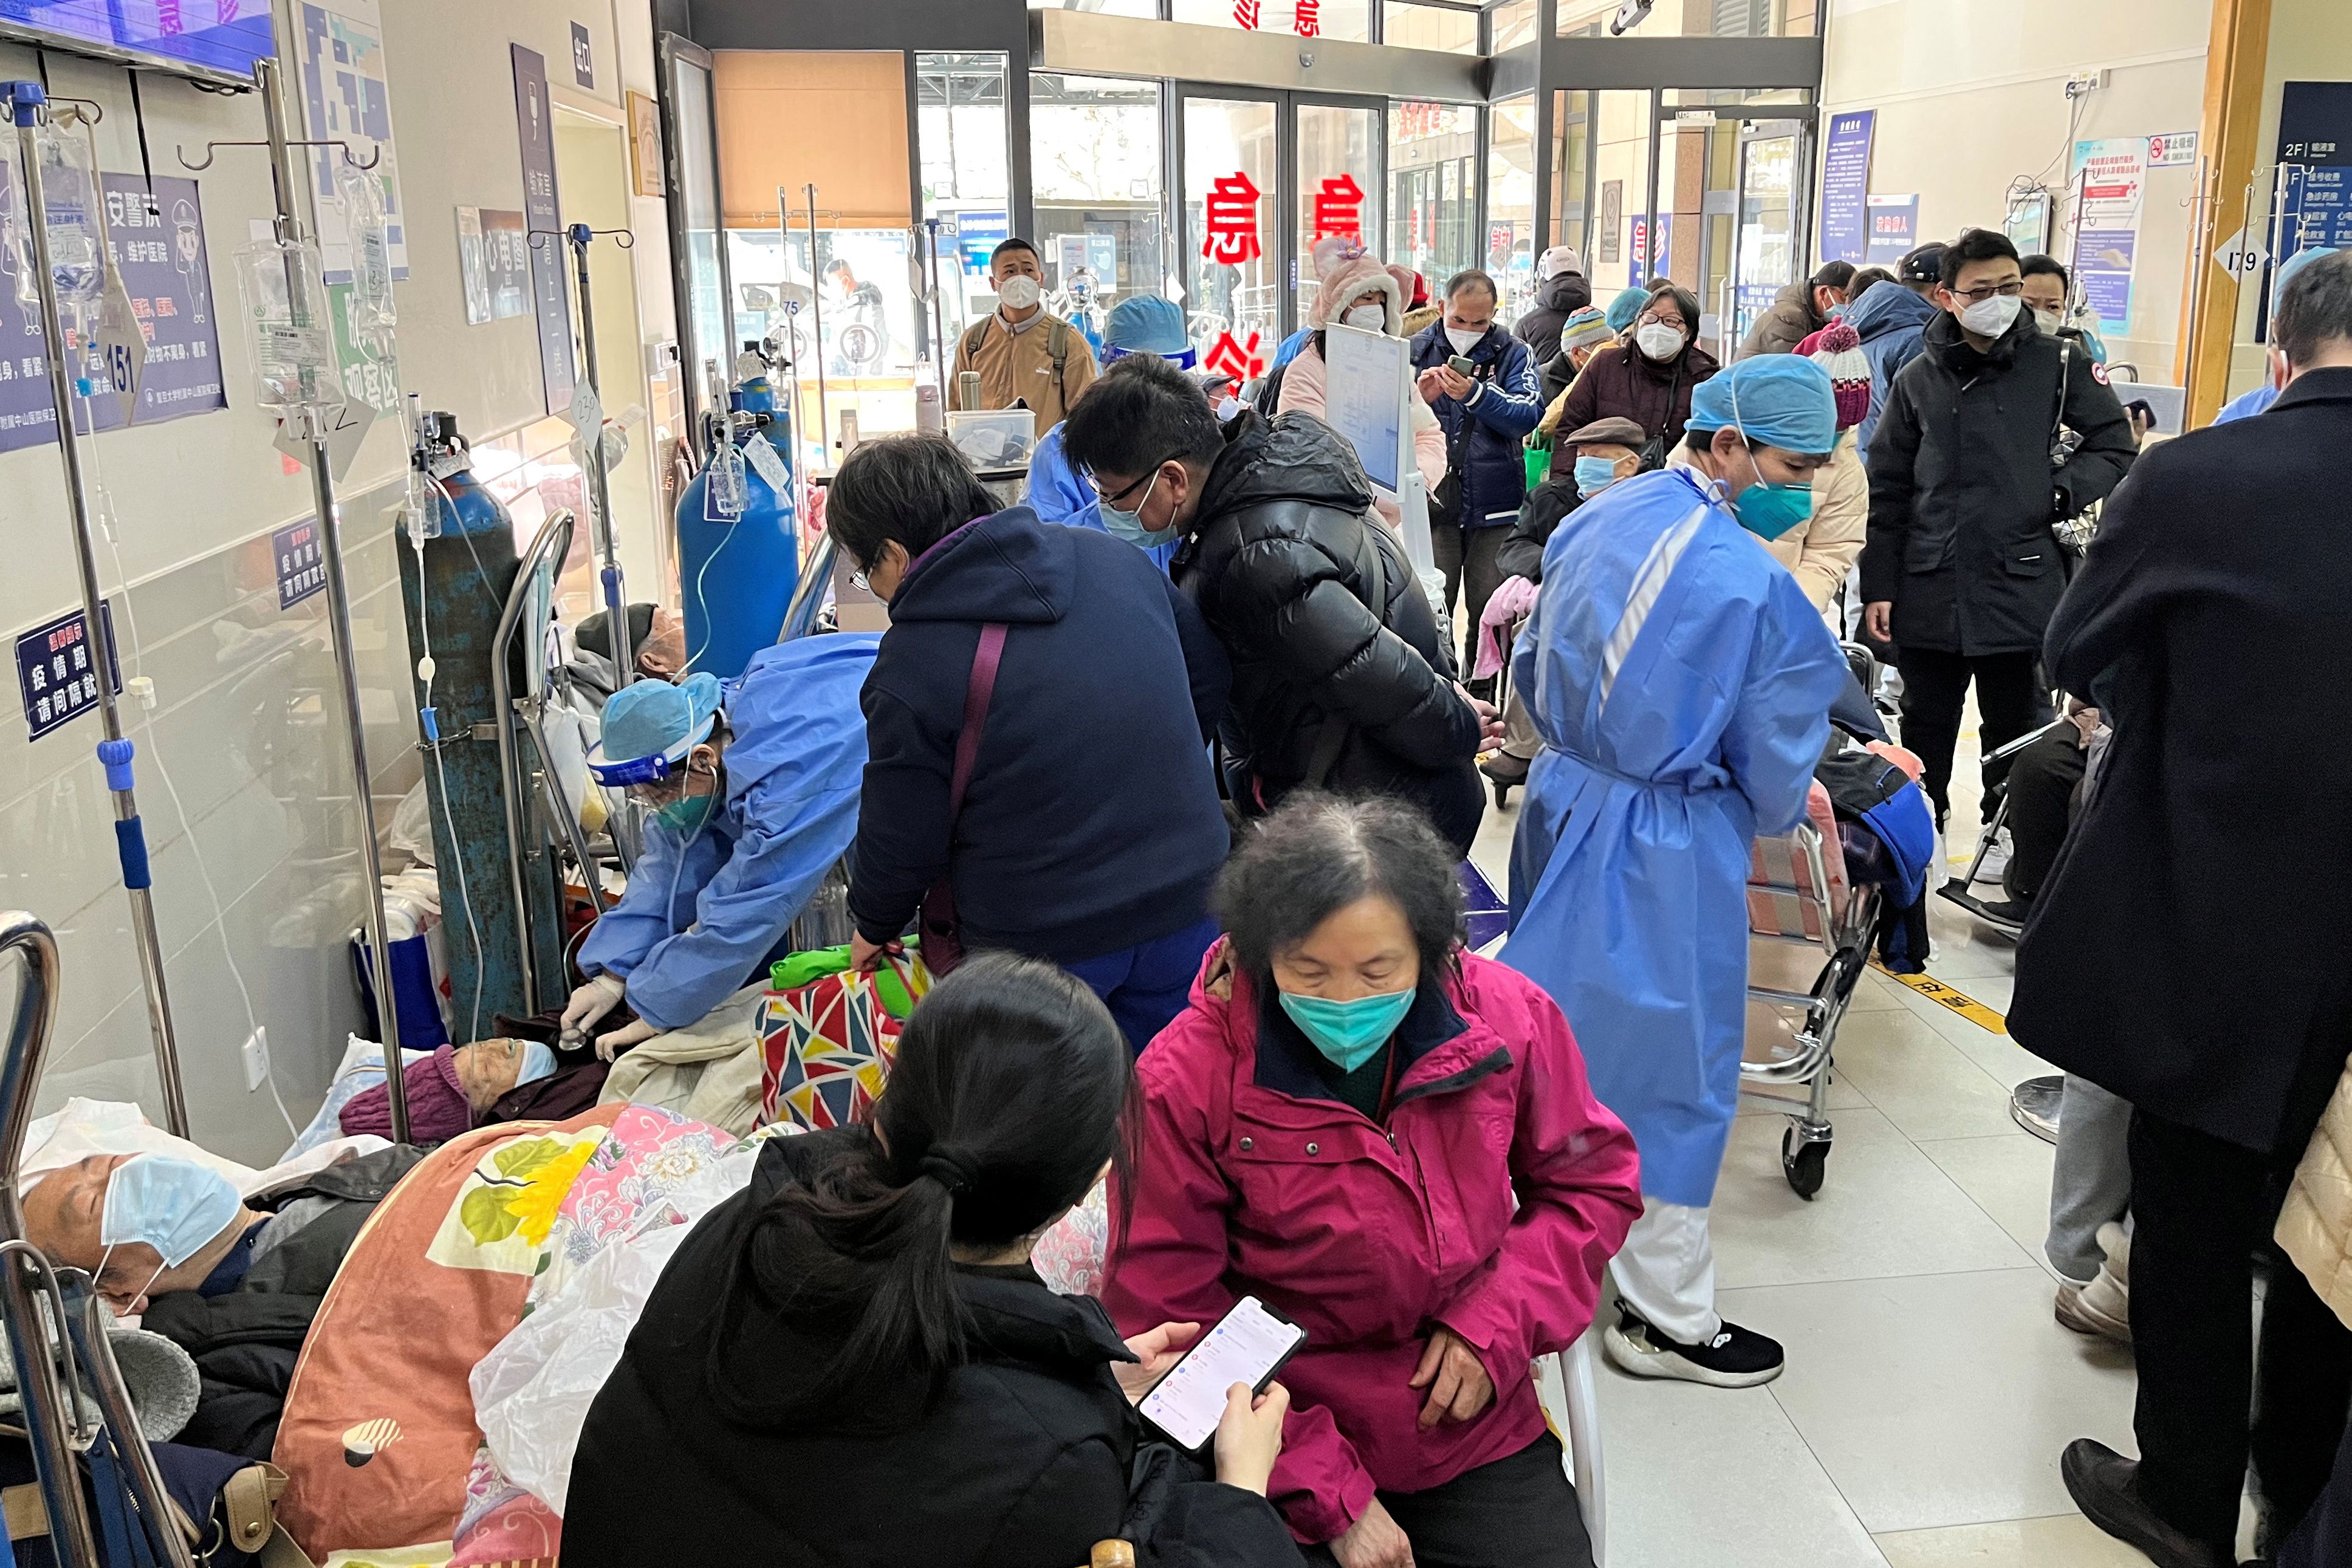 China records nearly 13,000 COVID deaths in hospitals in the past week